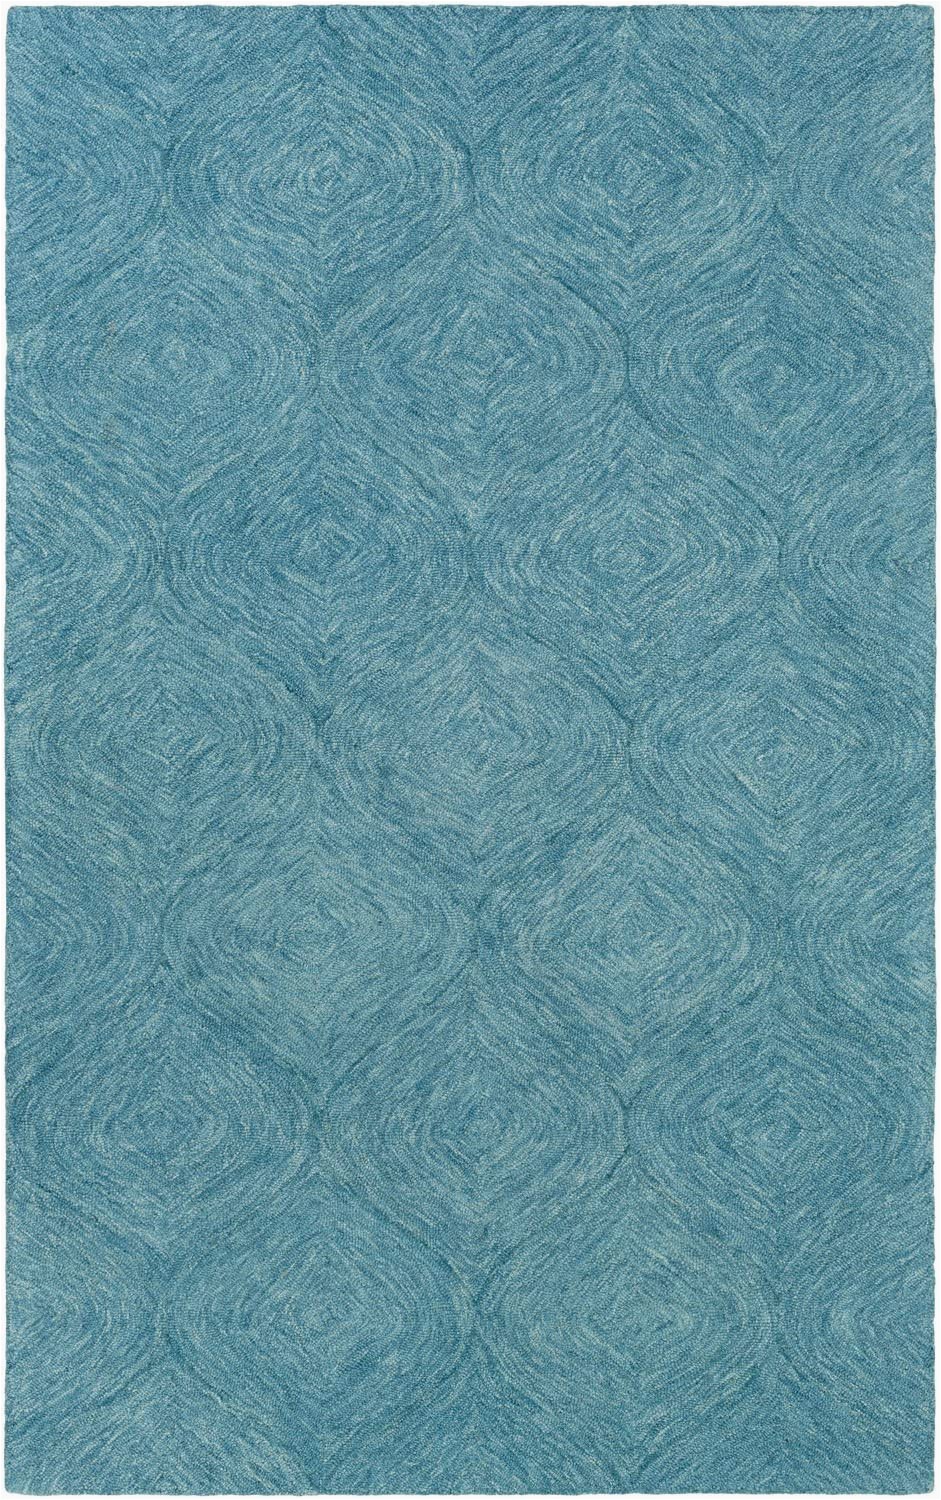 Solid Blue Wool Rug Super area Rugs Transitional Rug Teal Blue solid Premium